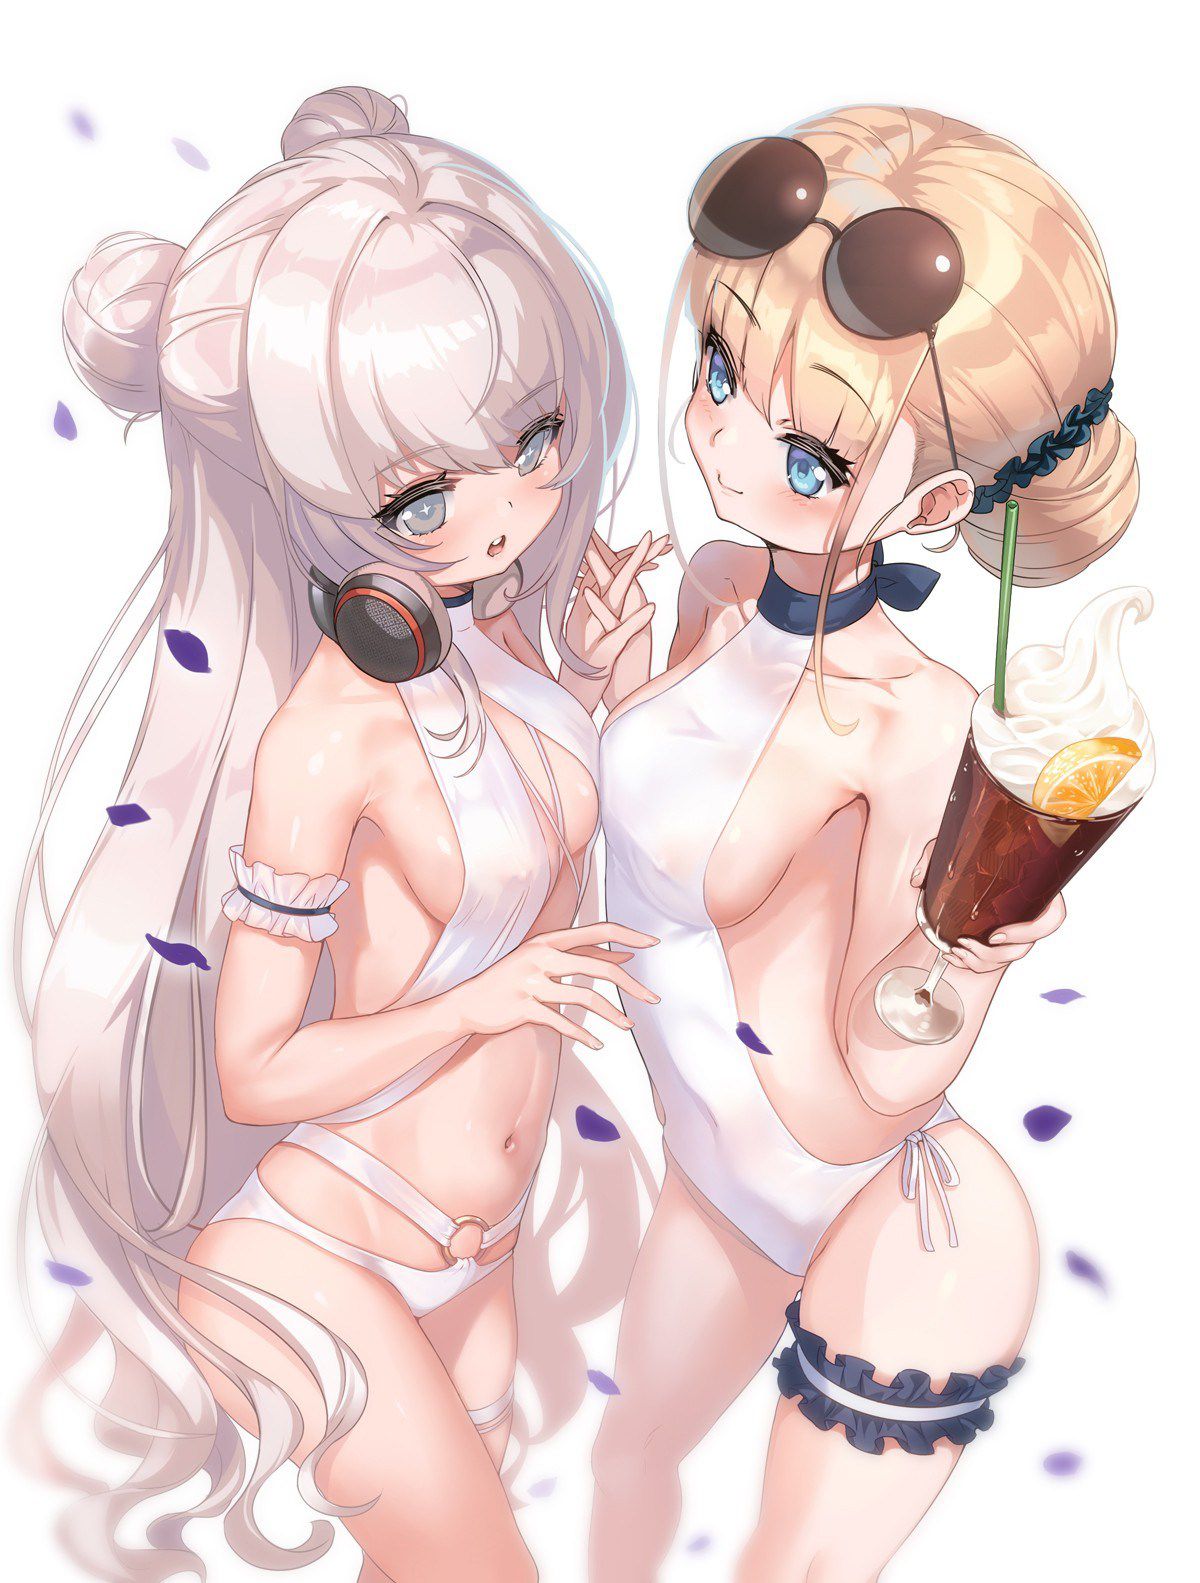 Two-dimensional erotic image I want to see while thankfully that the angel named Le Marant of Azur Lane was in this world 23